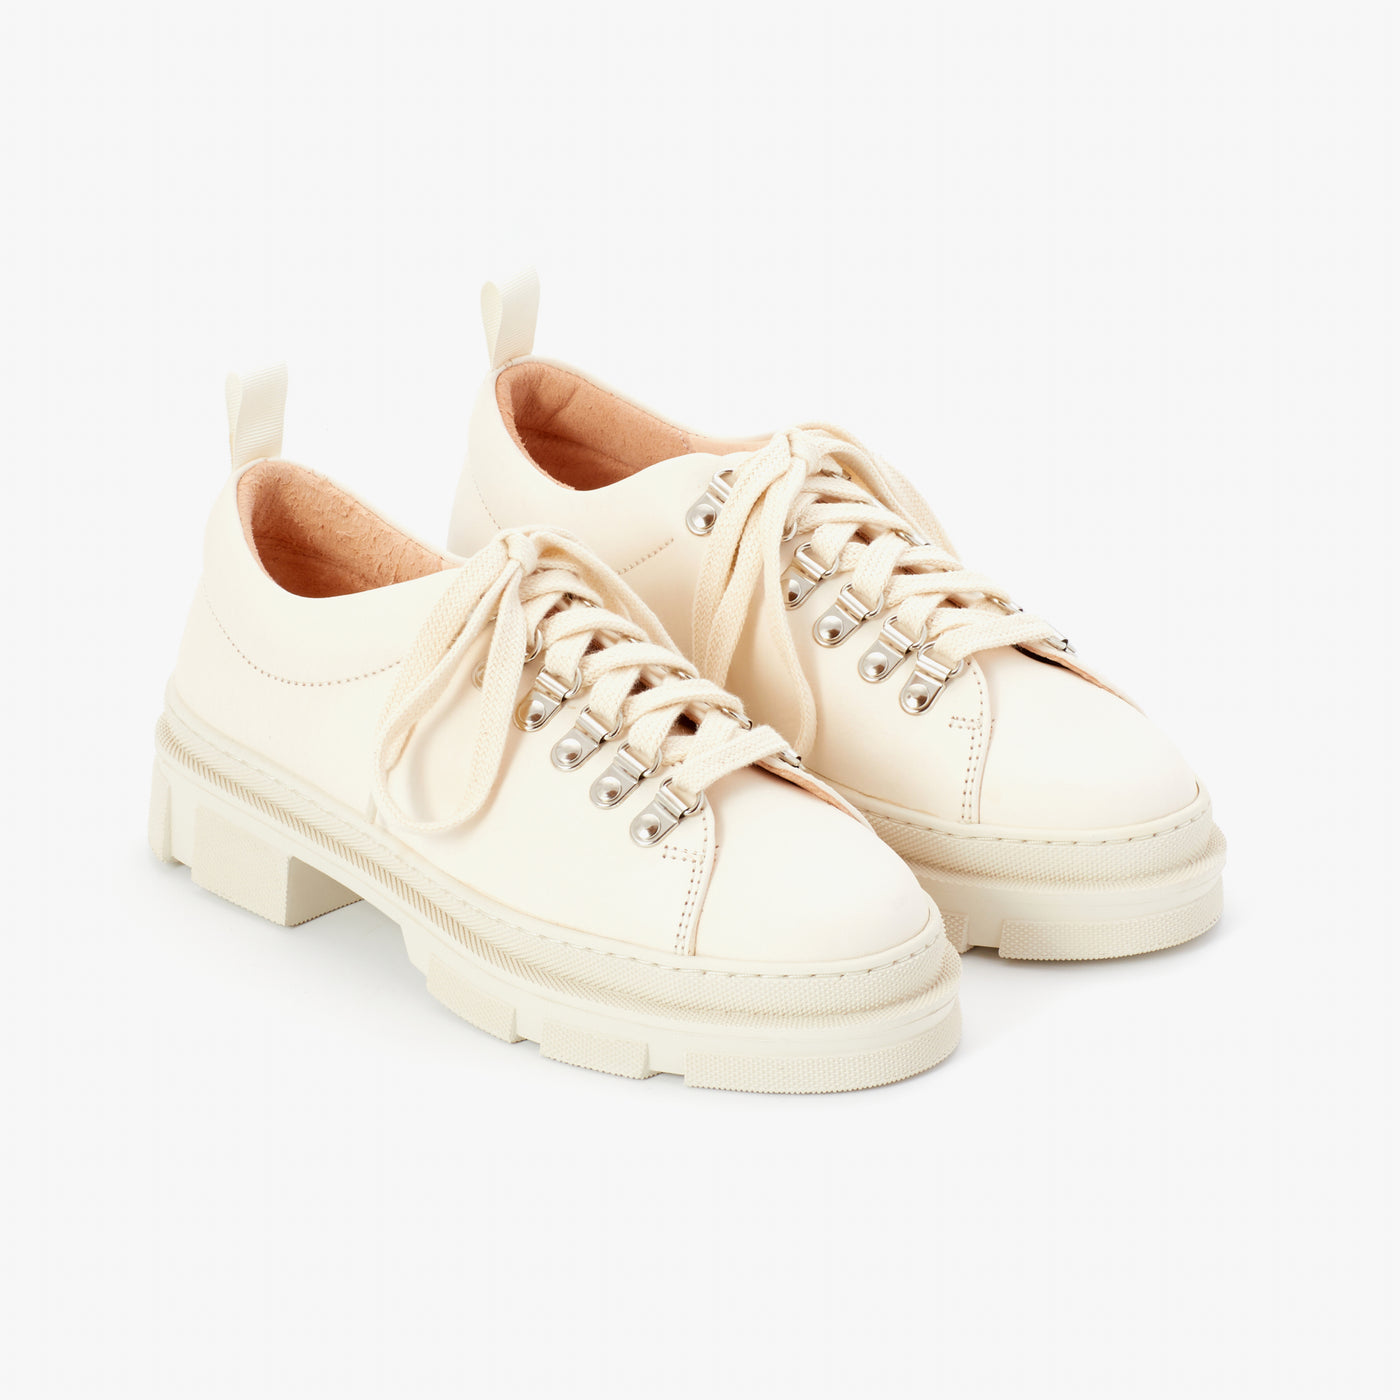 Astrid lace-up off-white